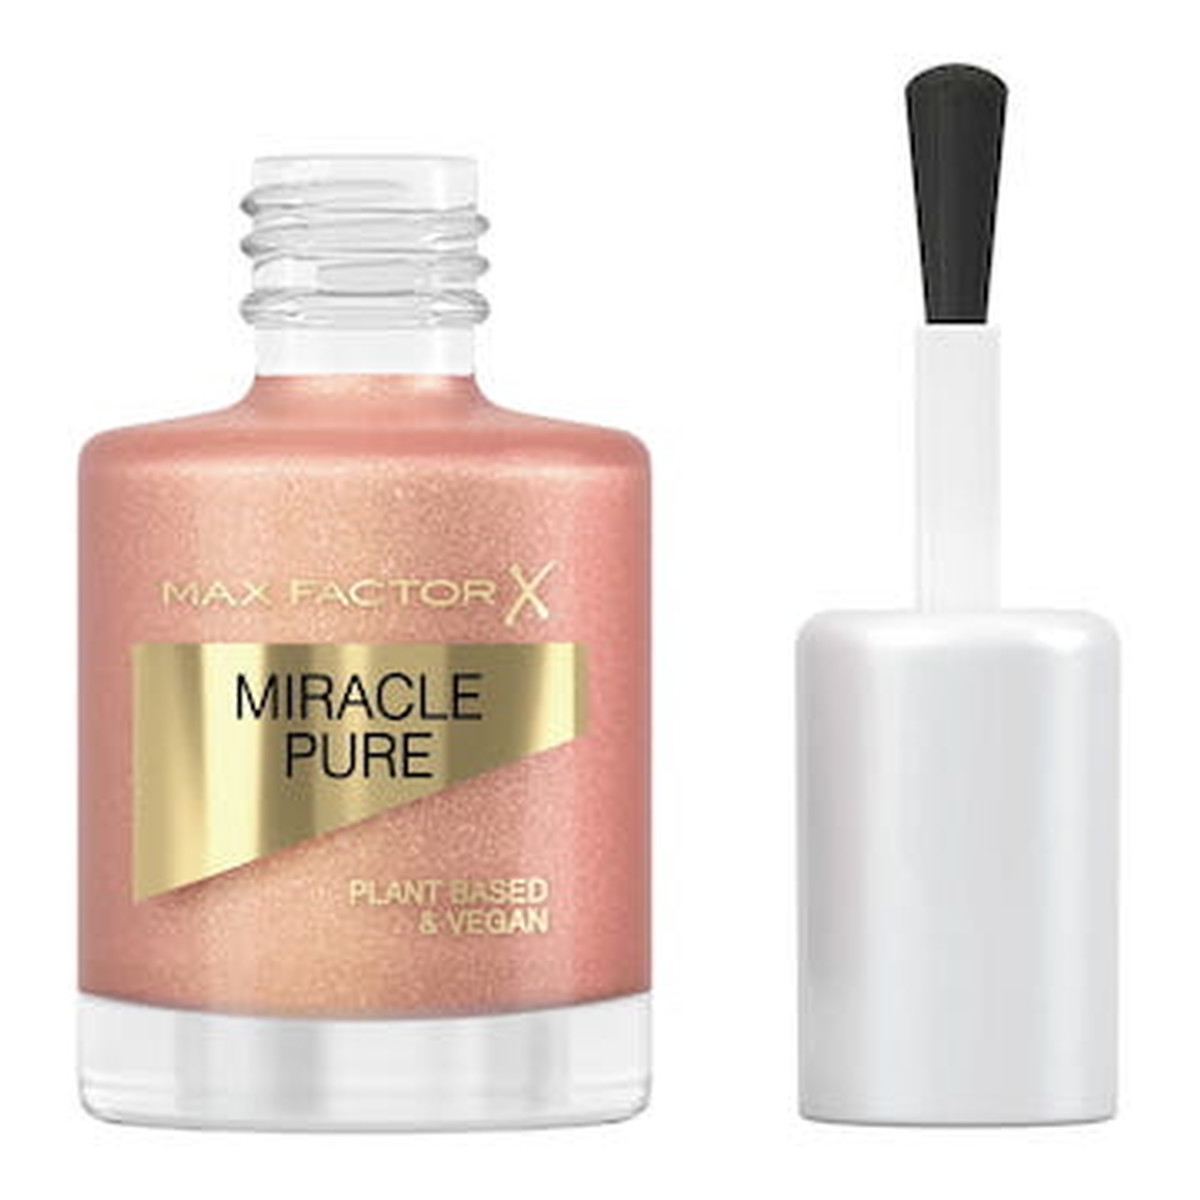 Max Factor Miracle Pure Lakier do paznokci 12ml